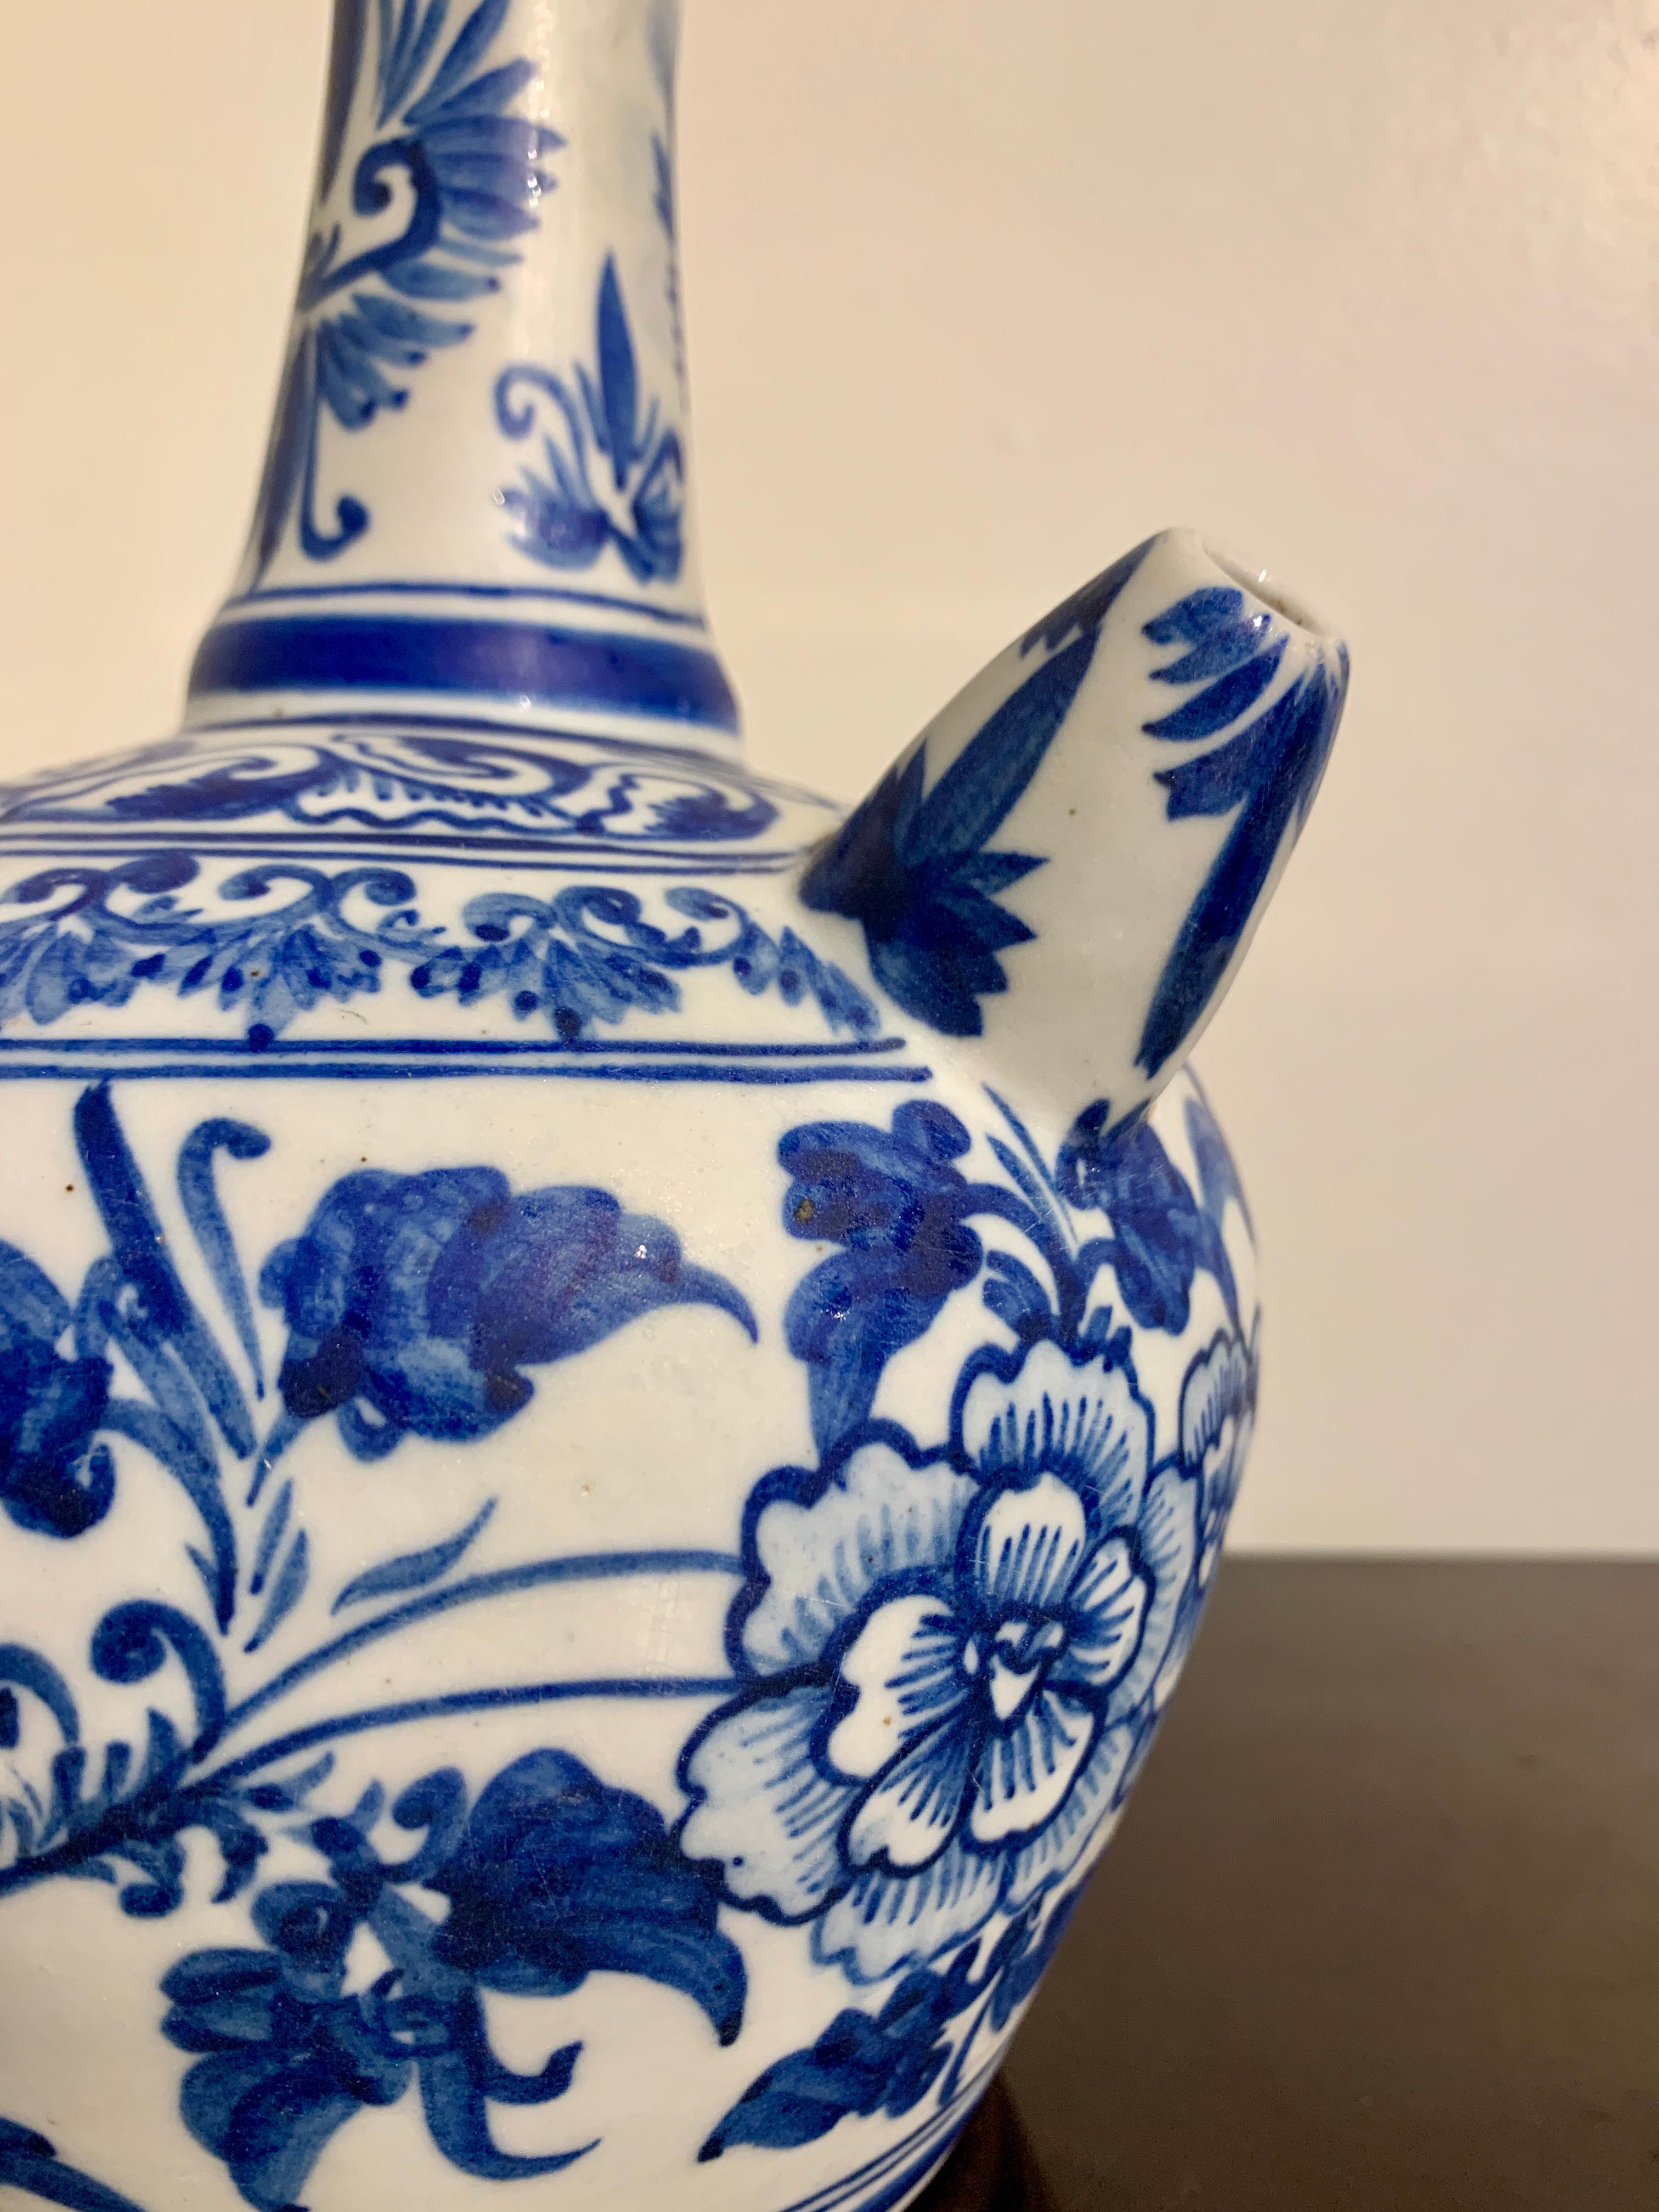 Glazed Chinese Blue and White Porcelain Kendi, Transitional Period, 17th Century, China For Sale